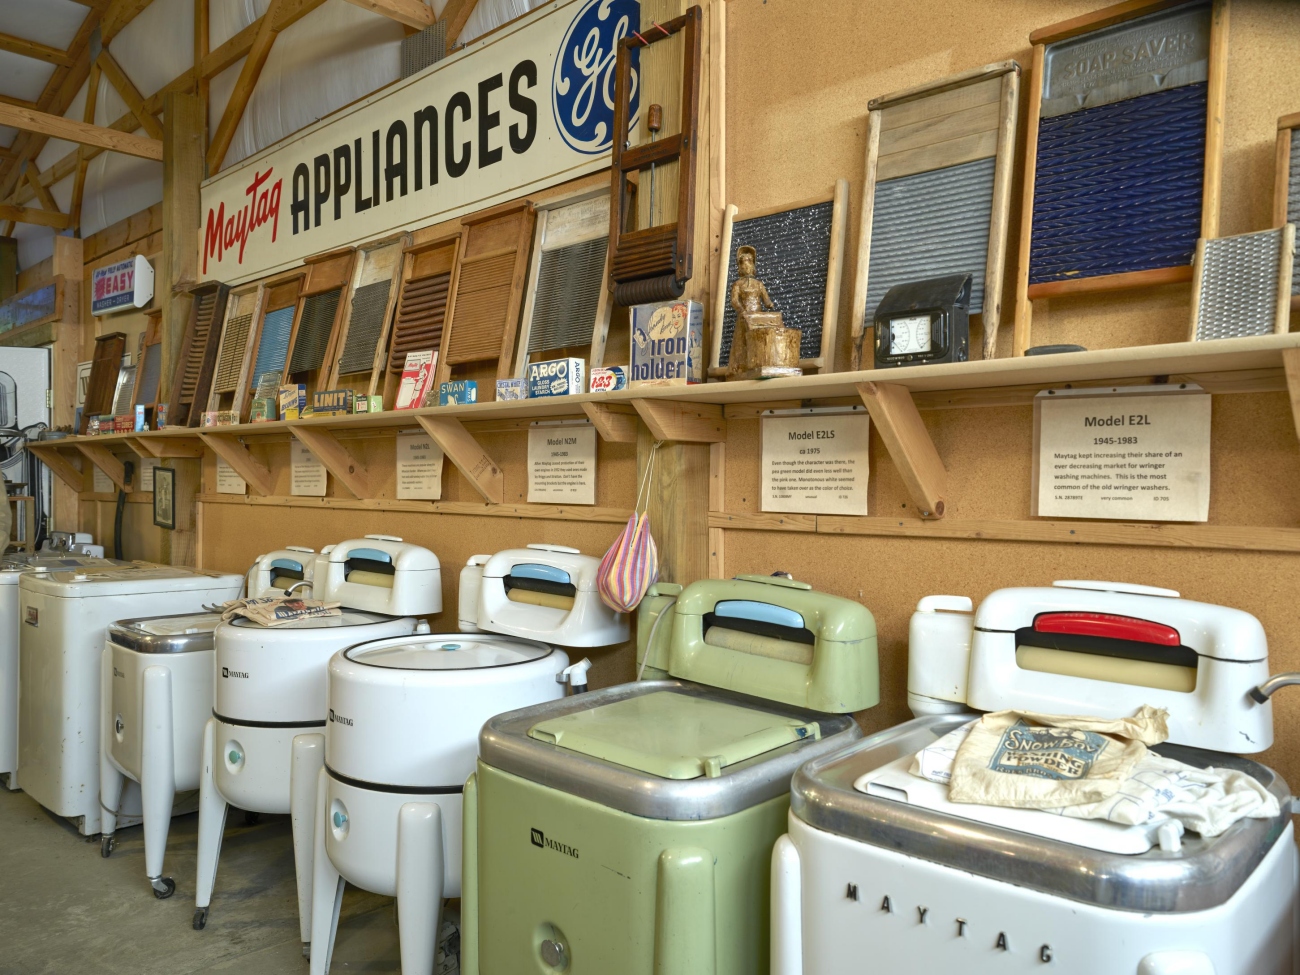 Lee Maxwell's washing machine museum in Colorado